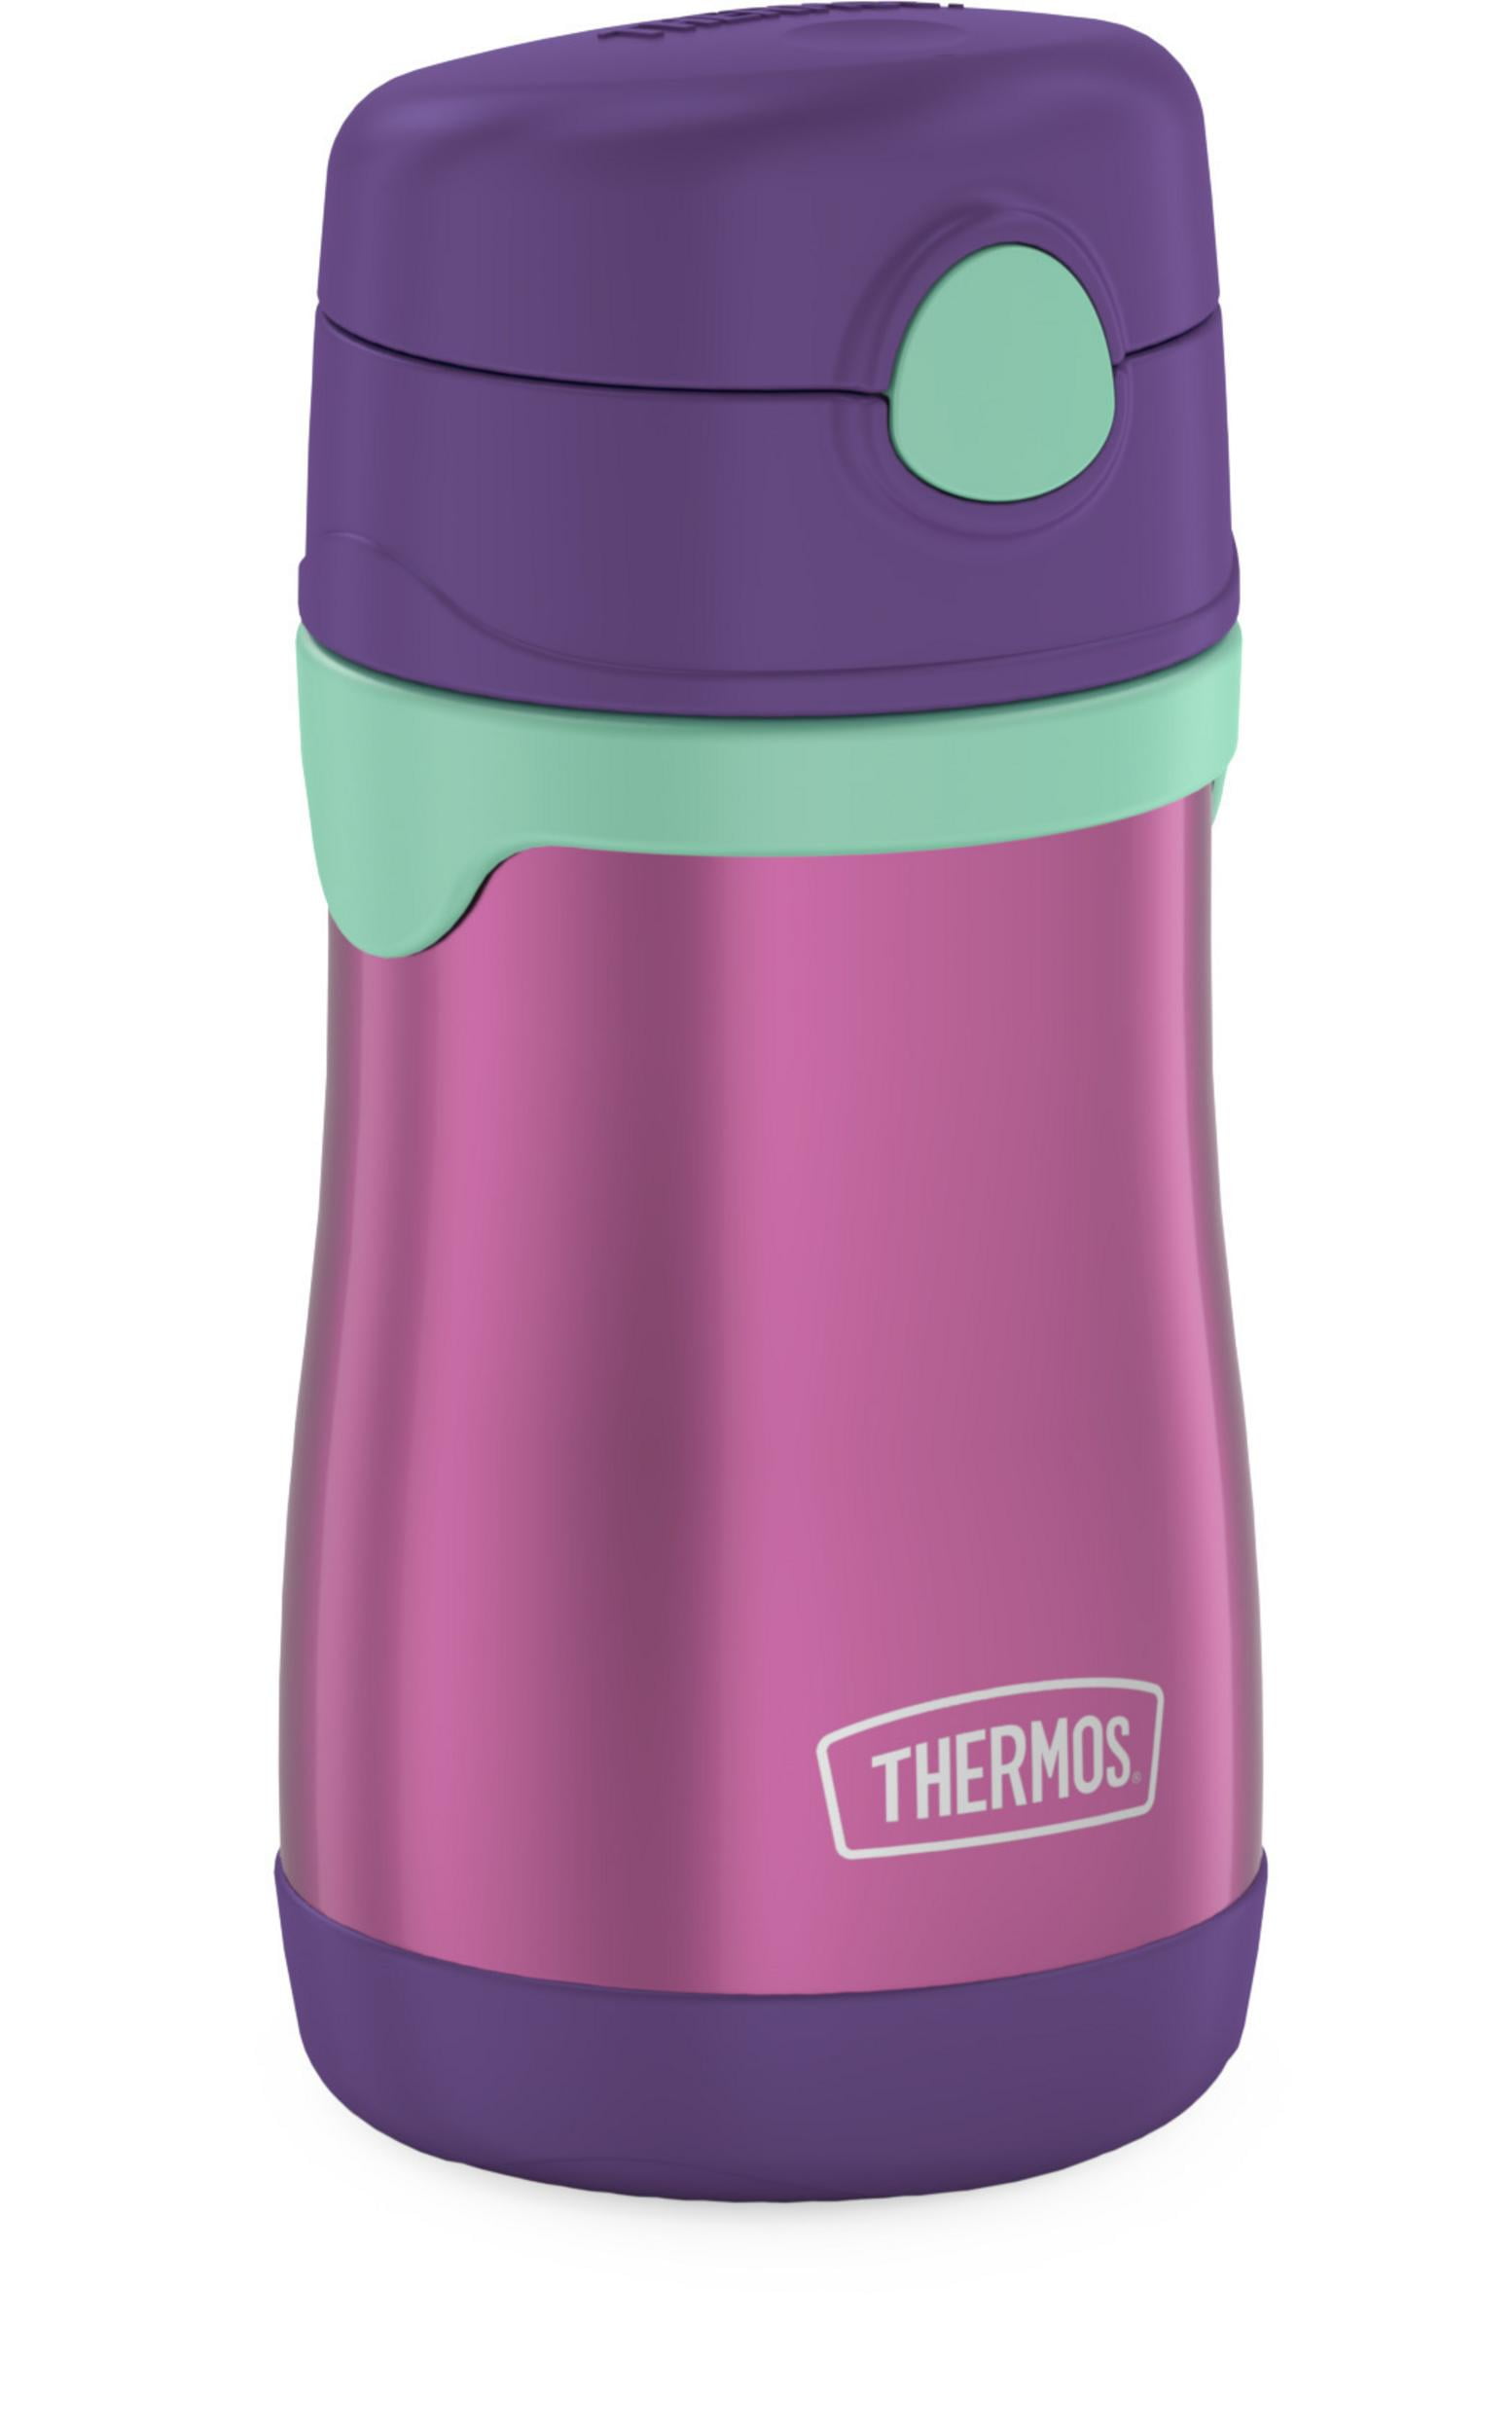  Baby thermos with straw 355 ml purple - Stainless steel  vacuum insulated bottle - THERMOS - 24.02 € - outdoorové oblečení a  vybavení shop